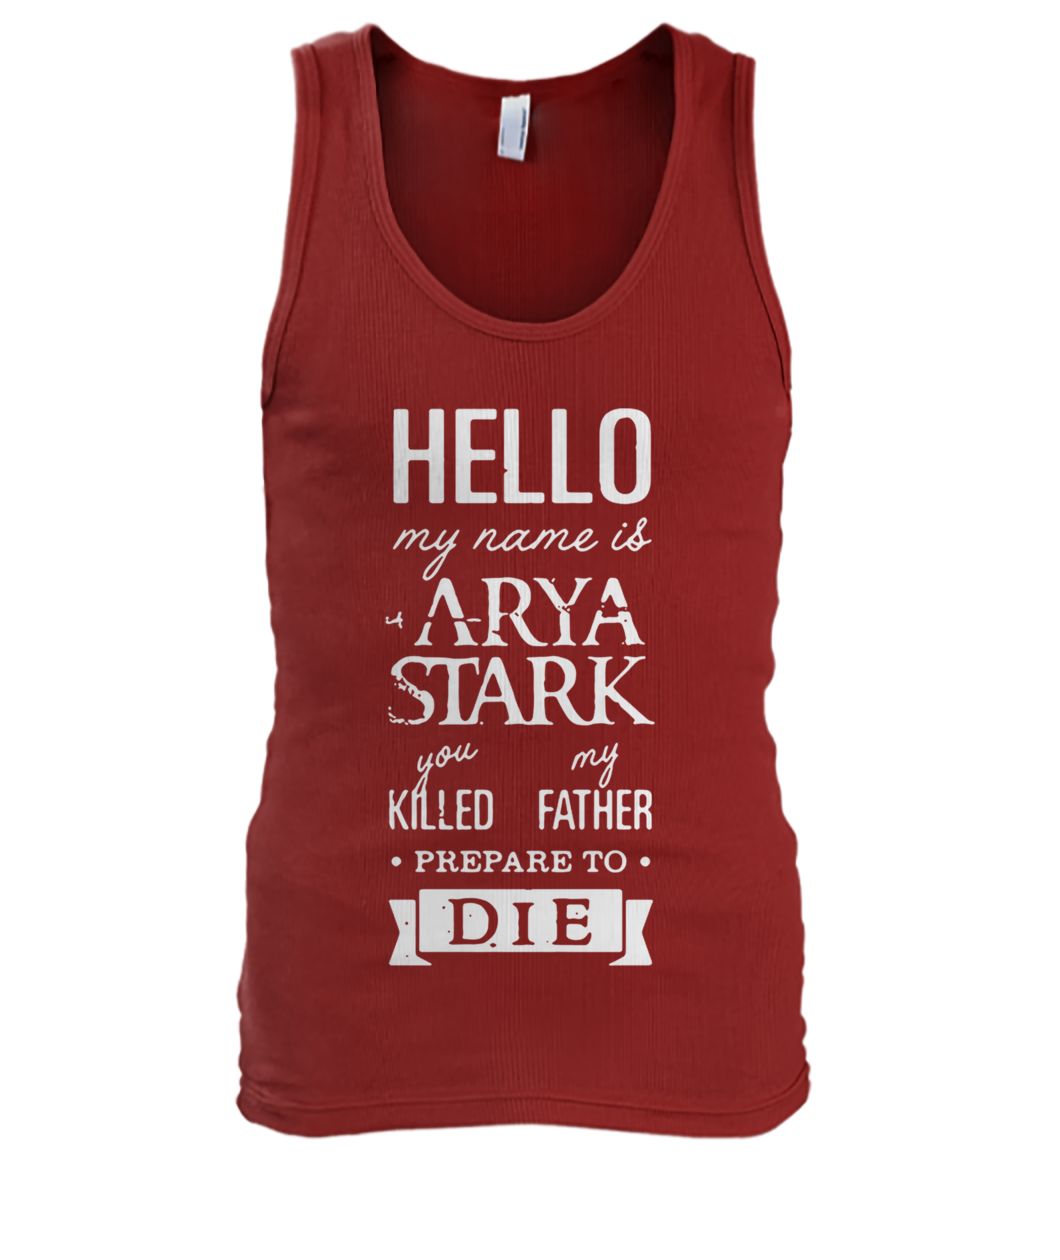 Hello my name is arya stark you killed my father prepare to die game of thrones men's tank top